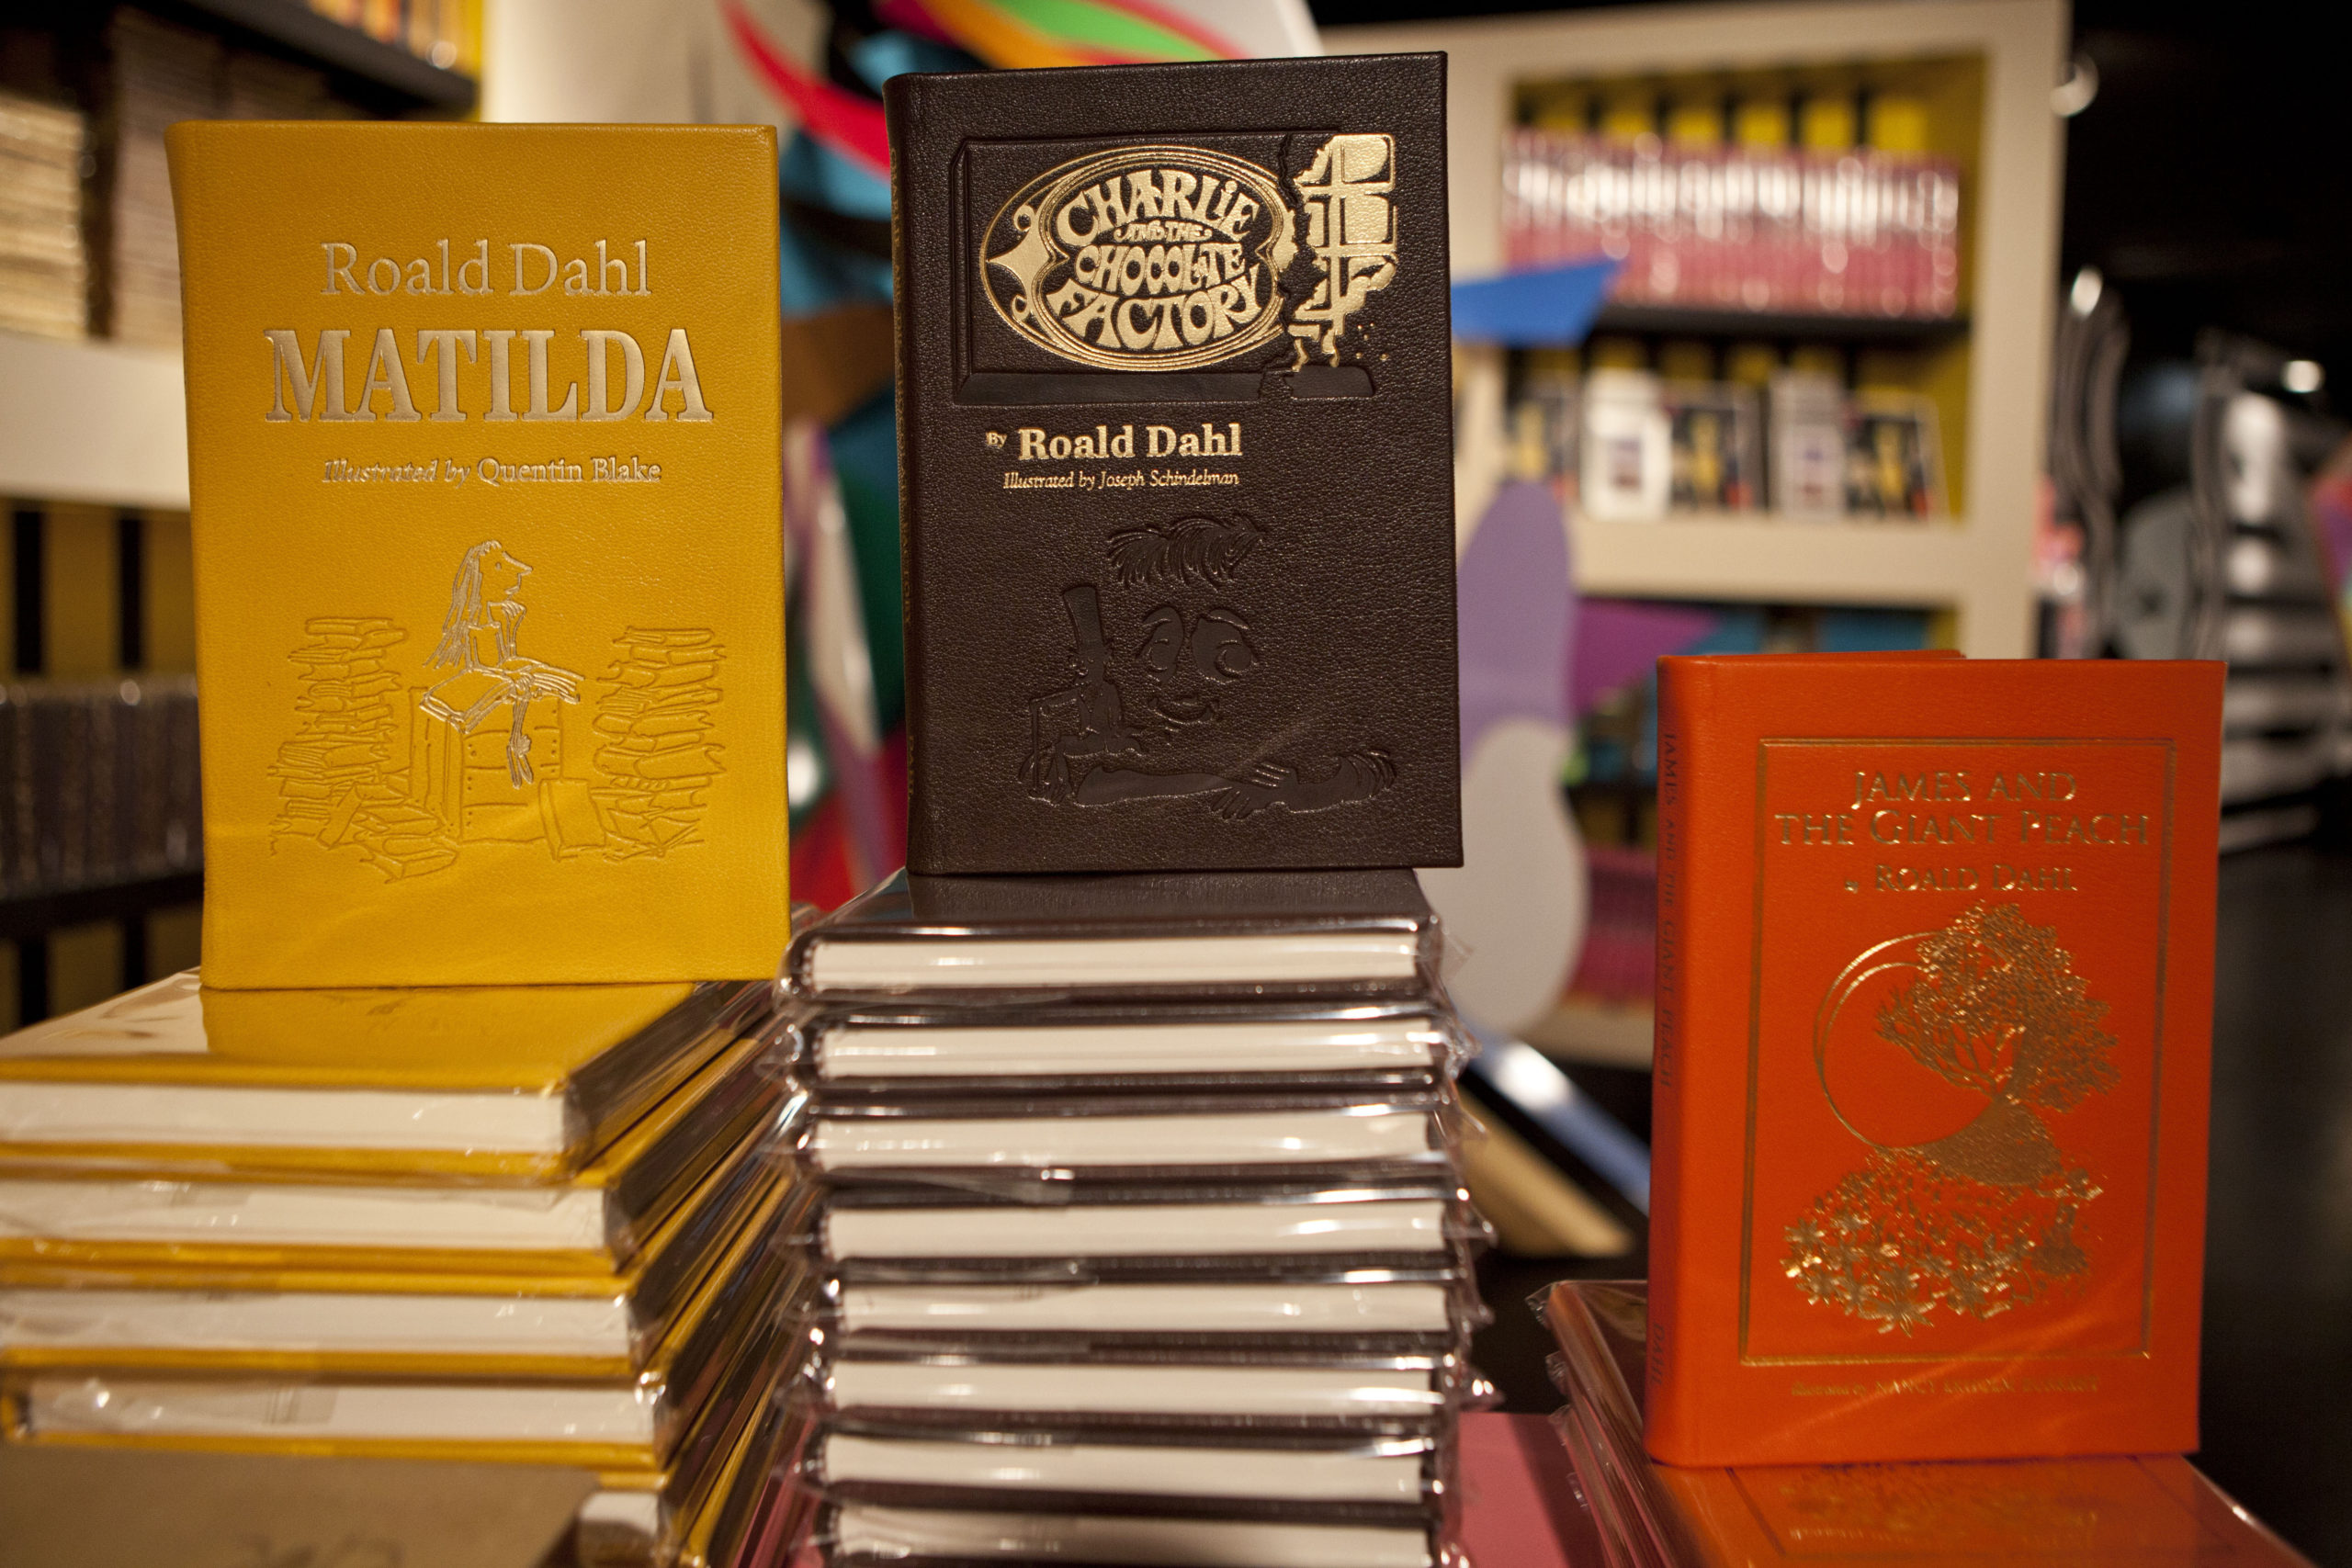 Books by Roald Dahl are displayed at the Barney's store on East 60th Street in New York on Nov. 21, 2011.